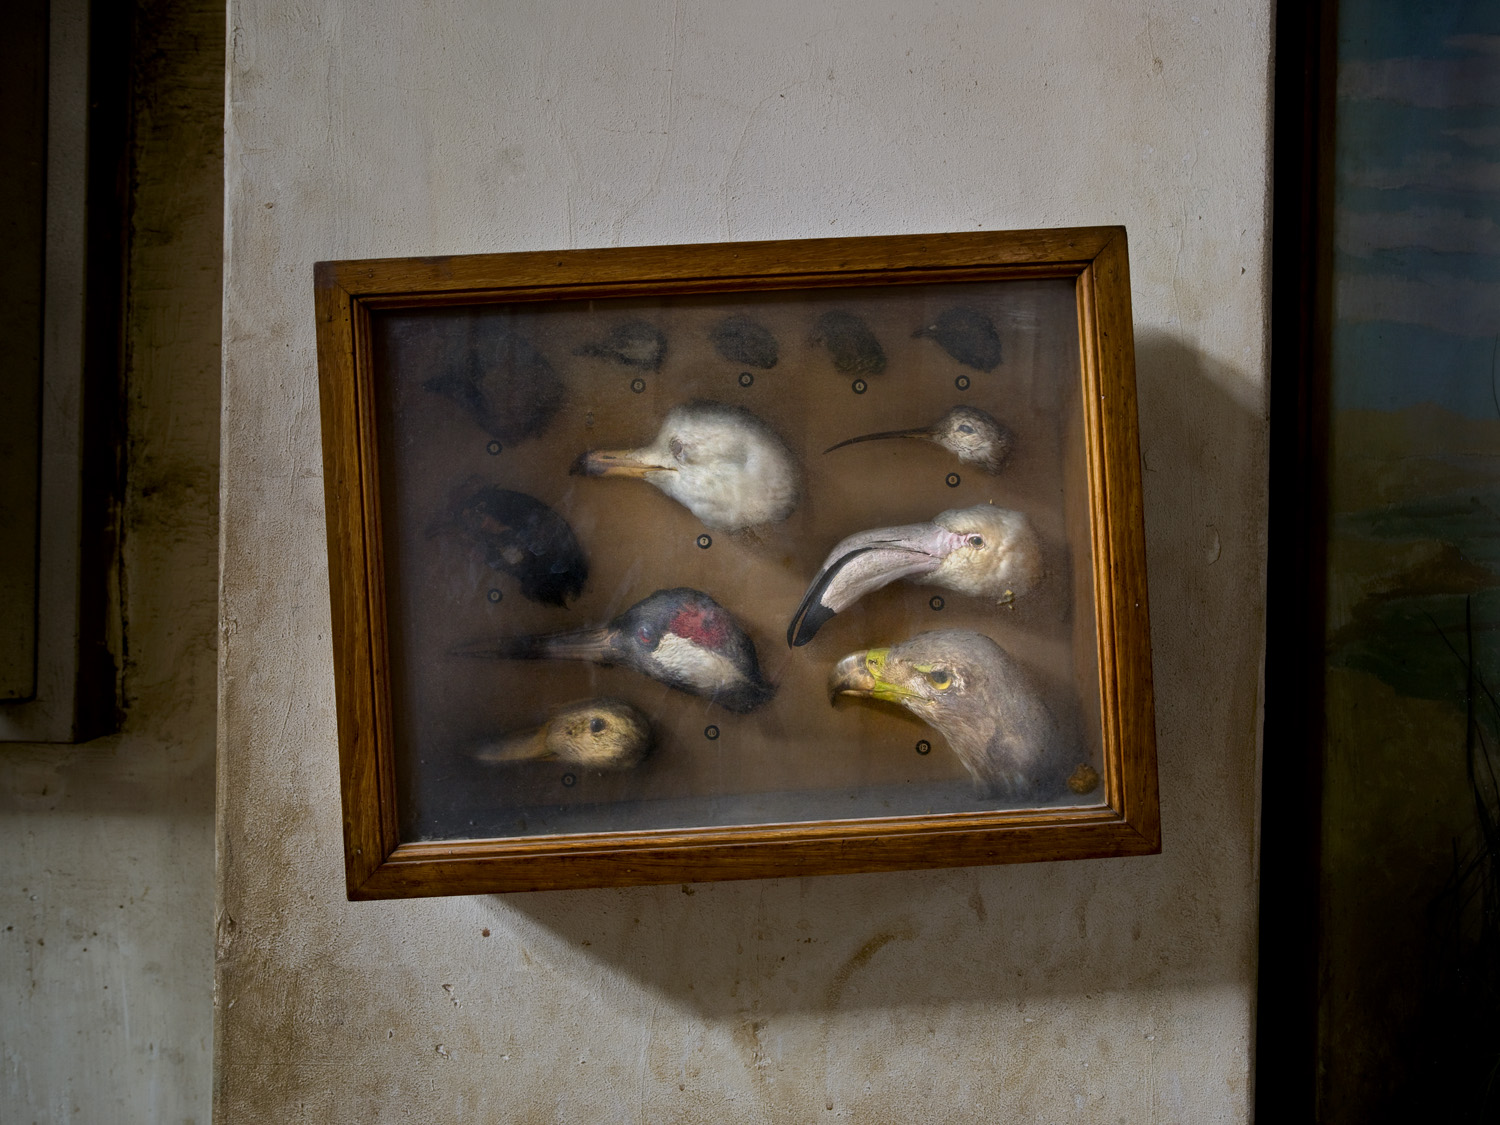  Bird Heads, The Agriculture Museum in Cairo, 2007 